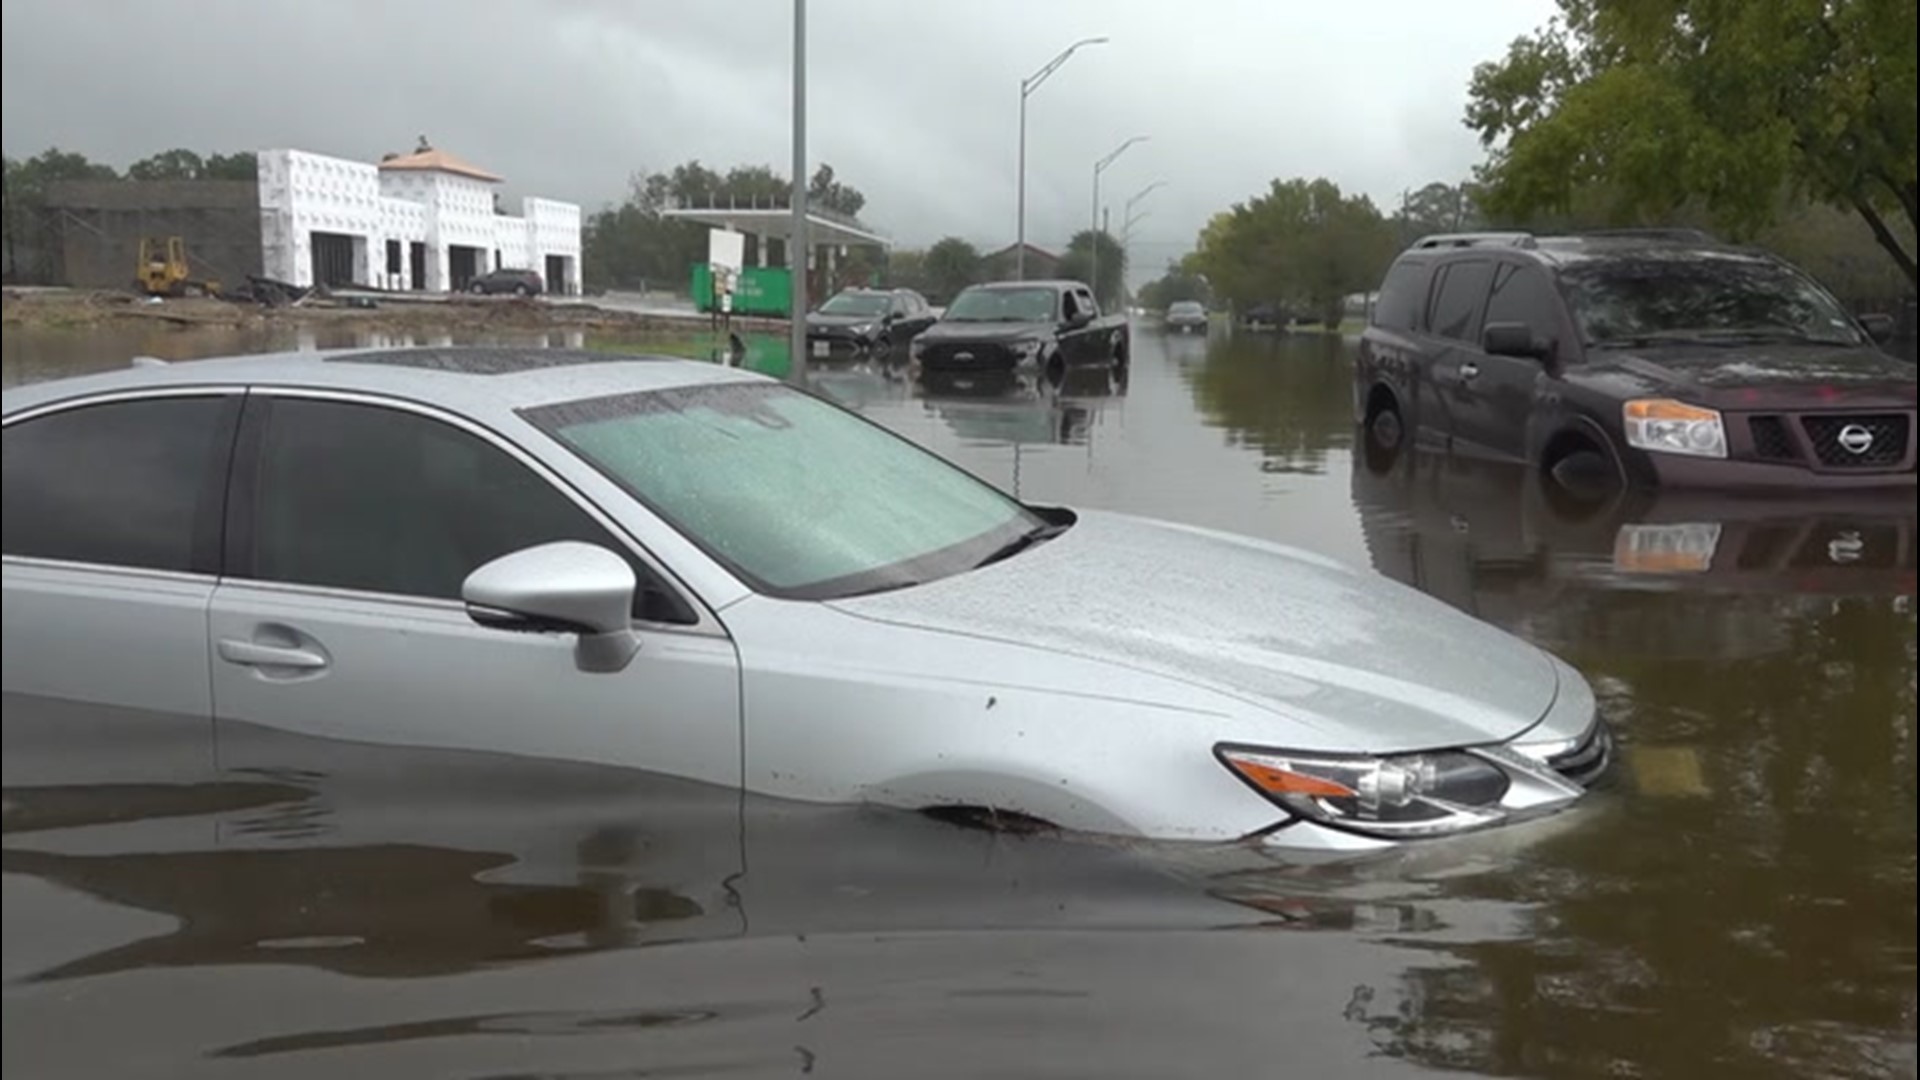 Vehicles all over Houston, Texas, were stuck in floodwaters after Beta flooded the city with heavy rain on Sept. 22.